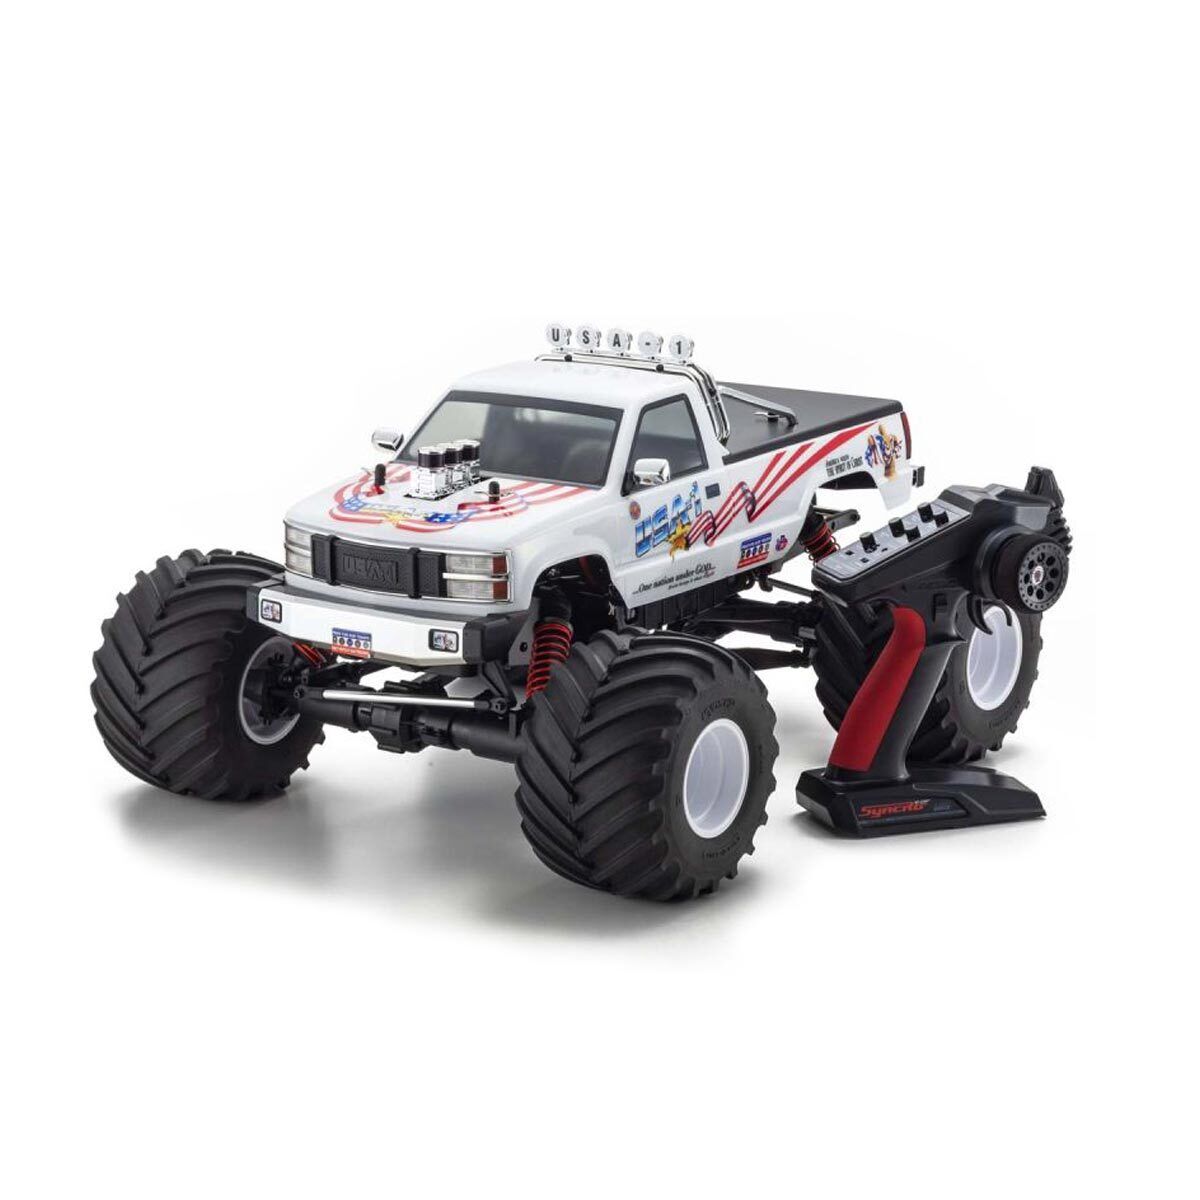 Kyosho 1/8 USA-1 VE 4 Wheel Drive 4WD 4S Brushless Monster Truck RTR KYO34257